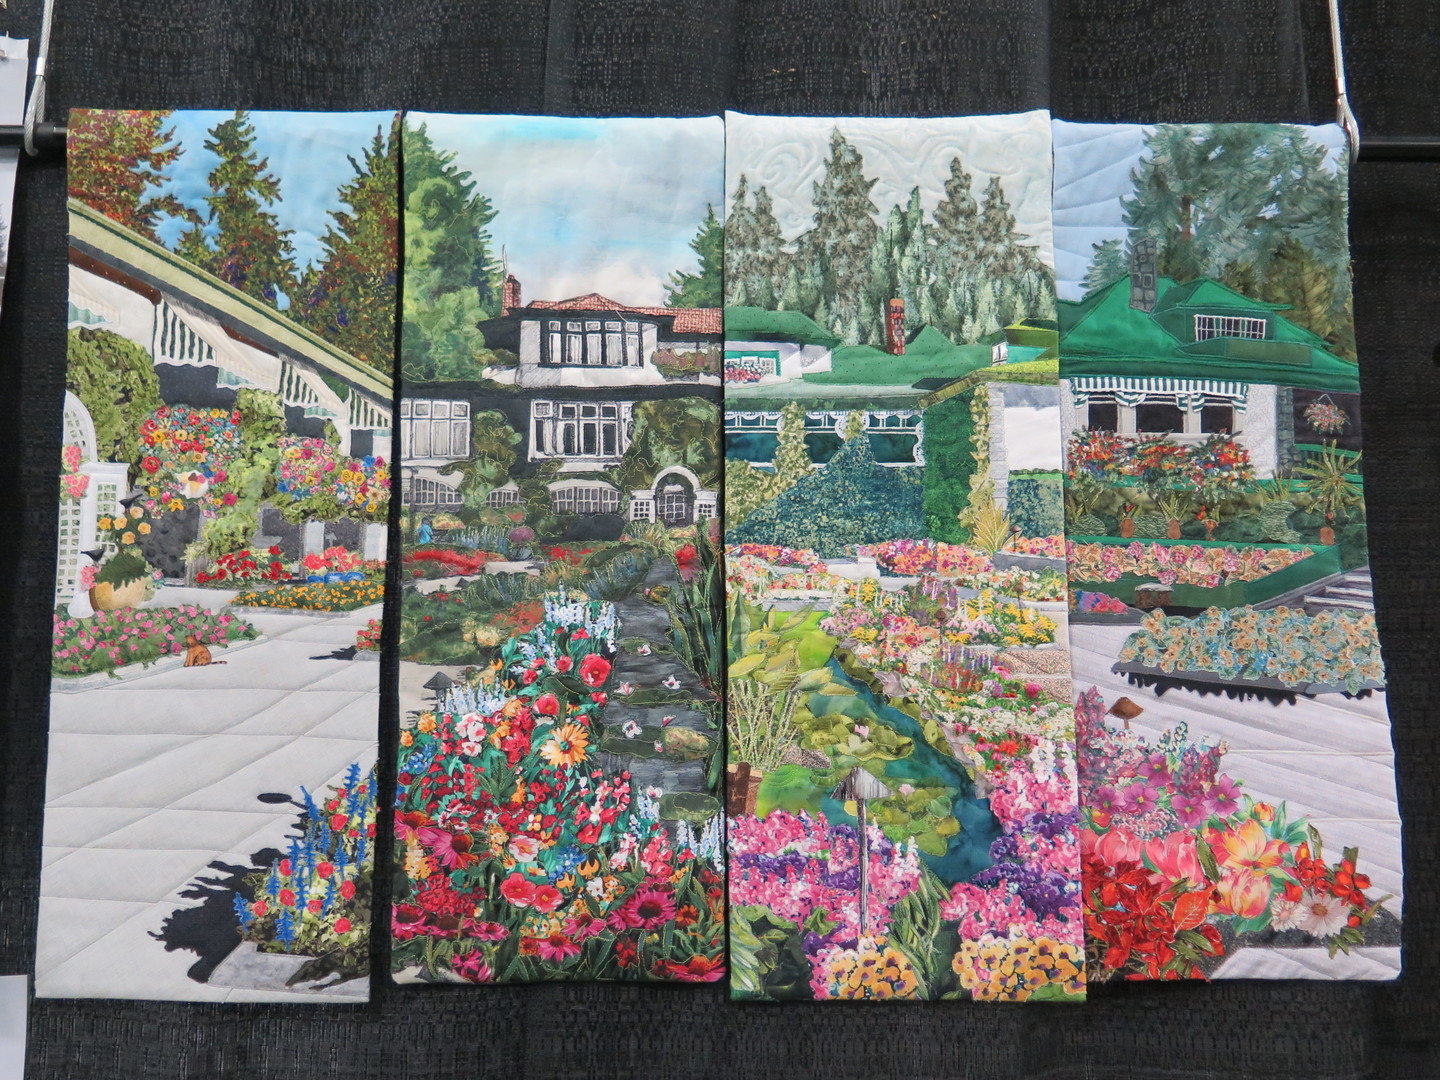 Victoria Quilters Guild presents "City of Gardens Quilt Show and Sale" Aug 5-7, 2022, Victoria, British Columbia, Canada